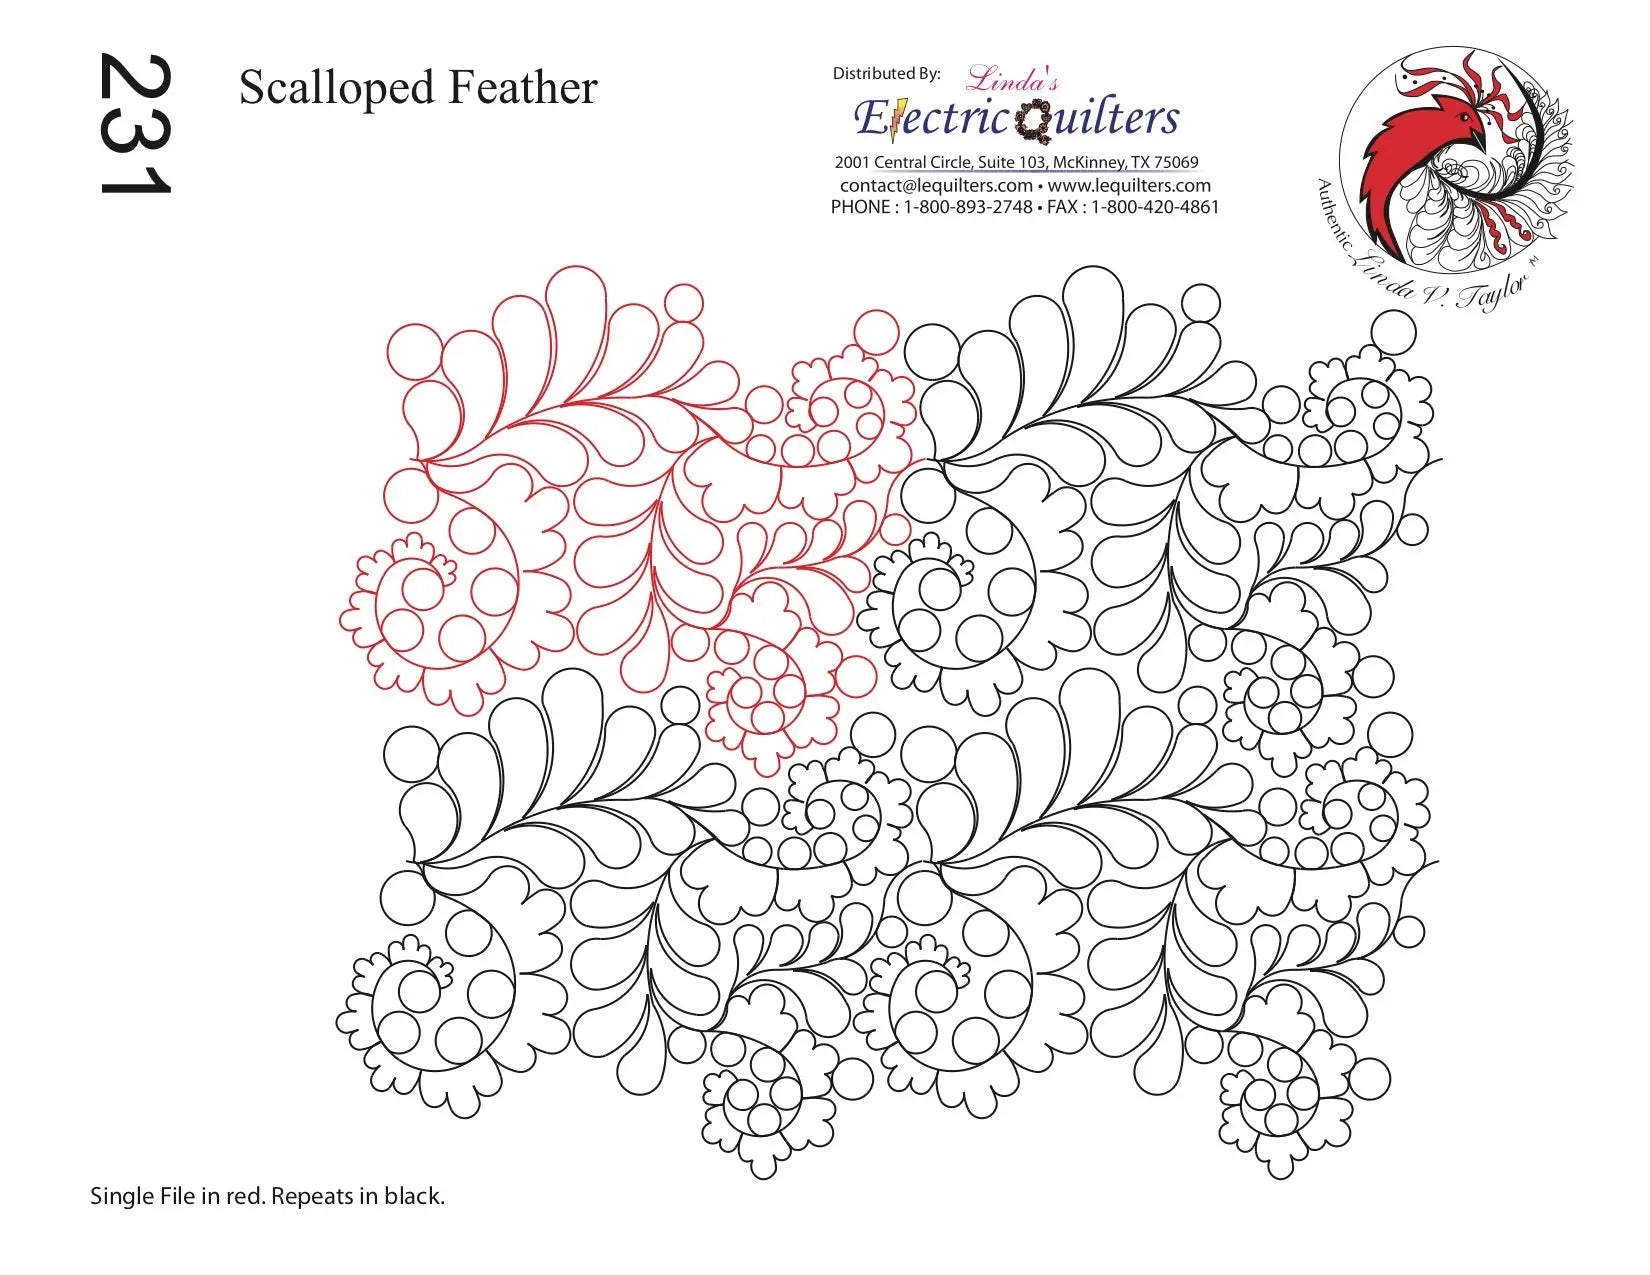 231 Scalloped Feather Pantograph by Linda V. Taylor - Linda's Electric Quilters